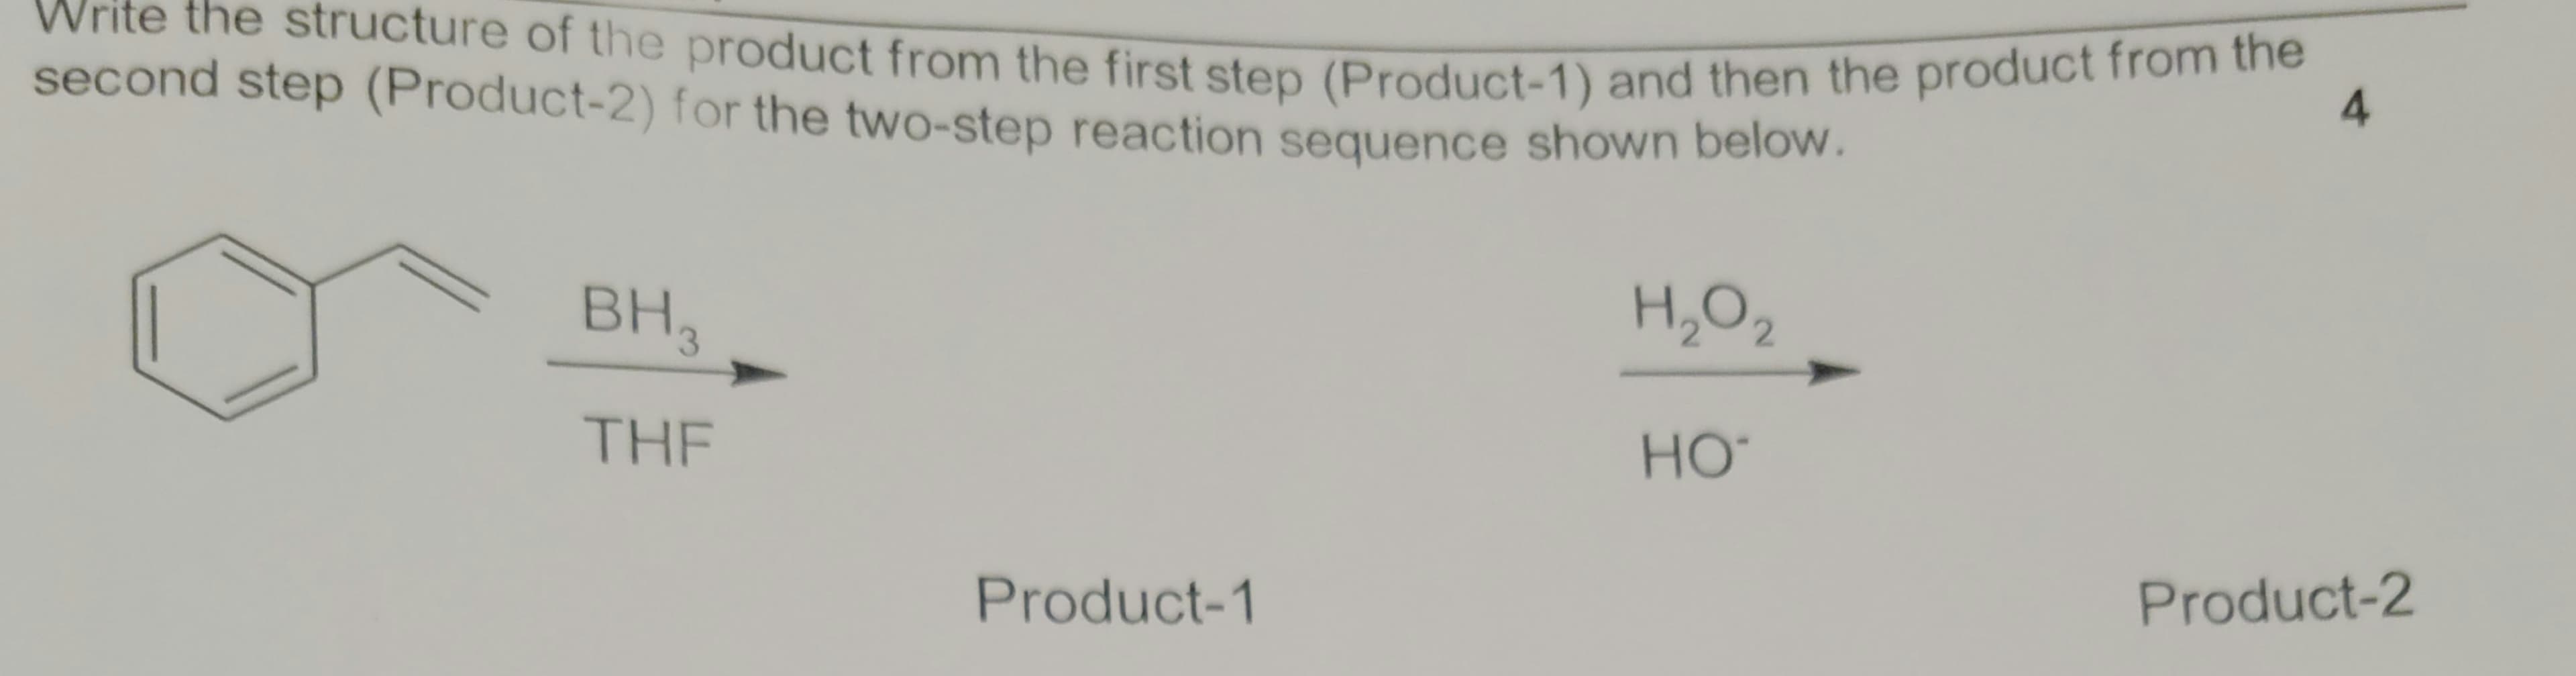 Write the structure of the product from the first step (Product-1) and then the product from the
second step (Product-2) for the two-step reaction sequence shown below.
4.
BH,
H,O,
THE
HO
Product-1
Product-2
